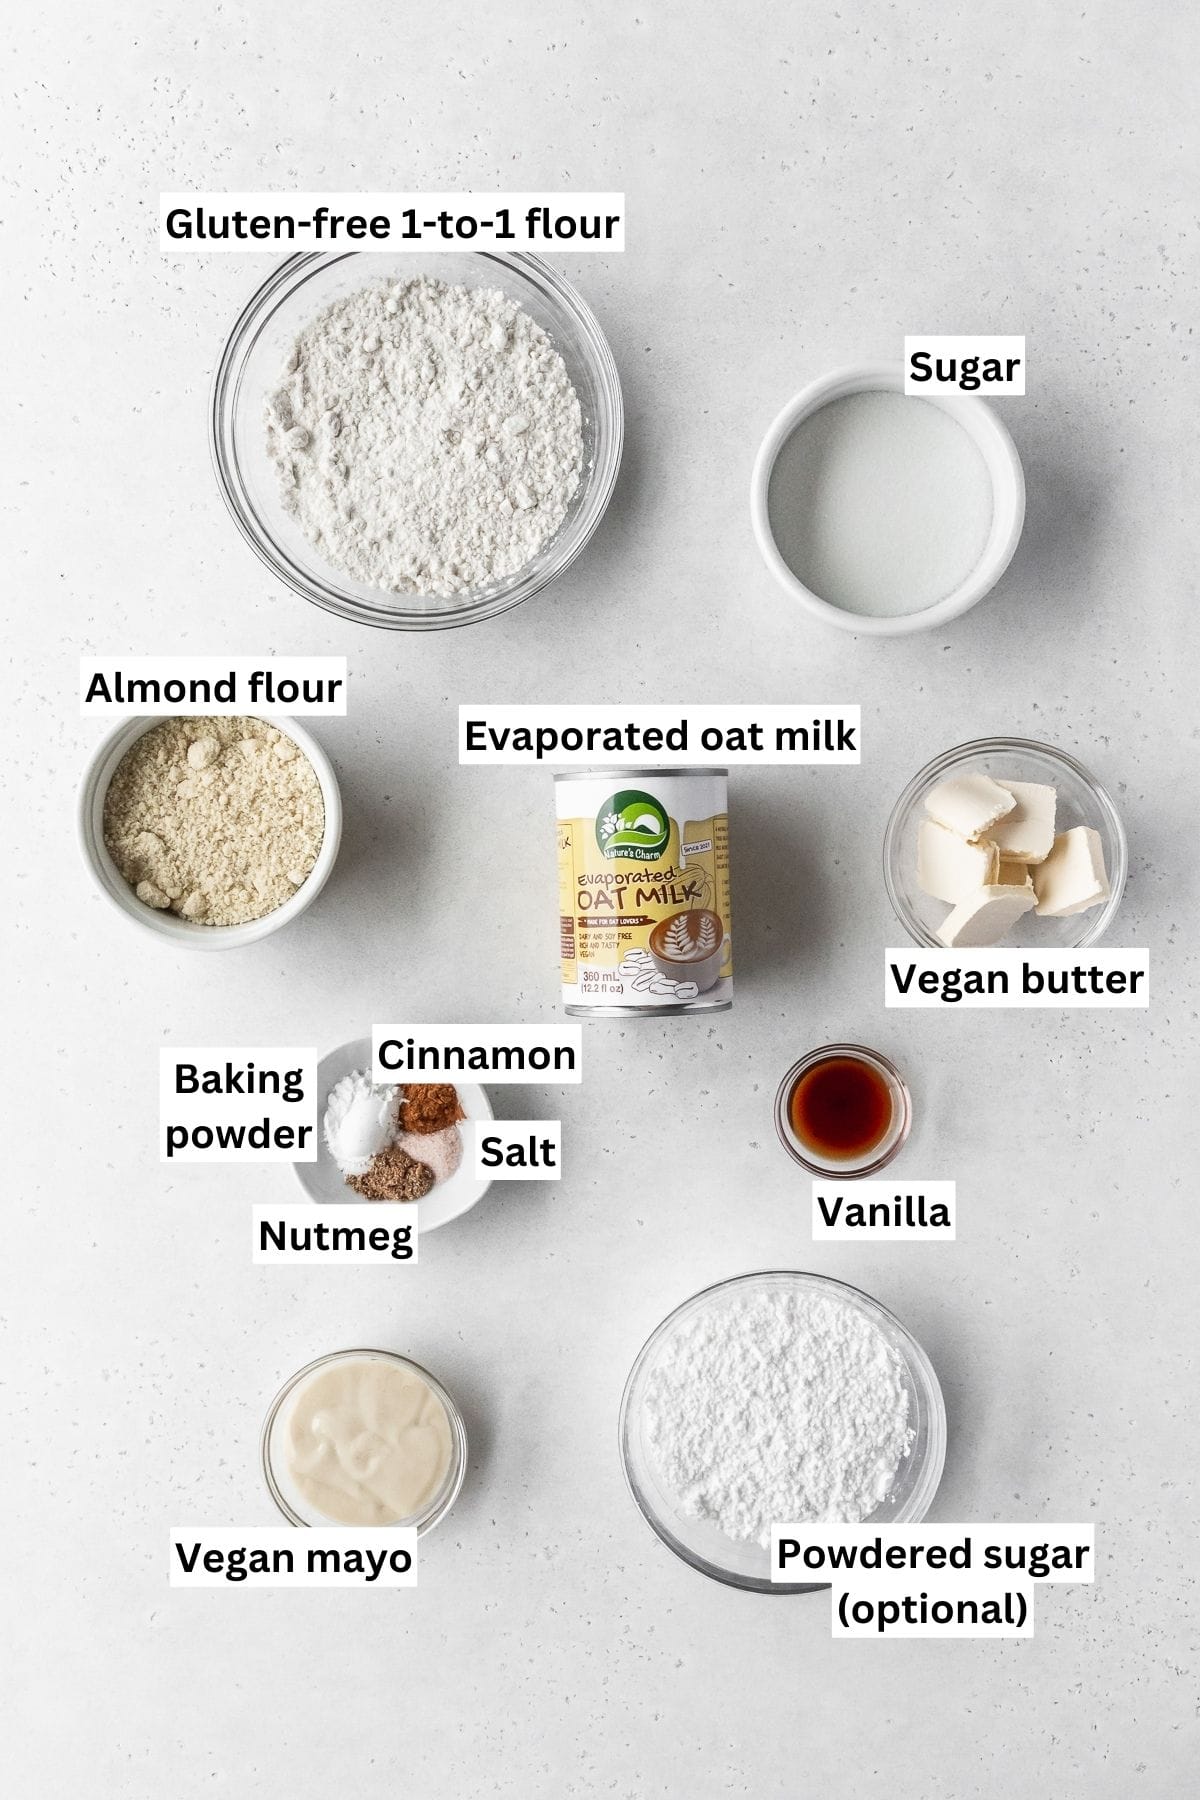 Ingredients needed for making dairy free gluten free vegan baked donuts laid out on a white table with text overlay.